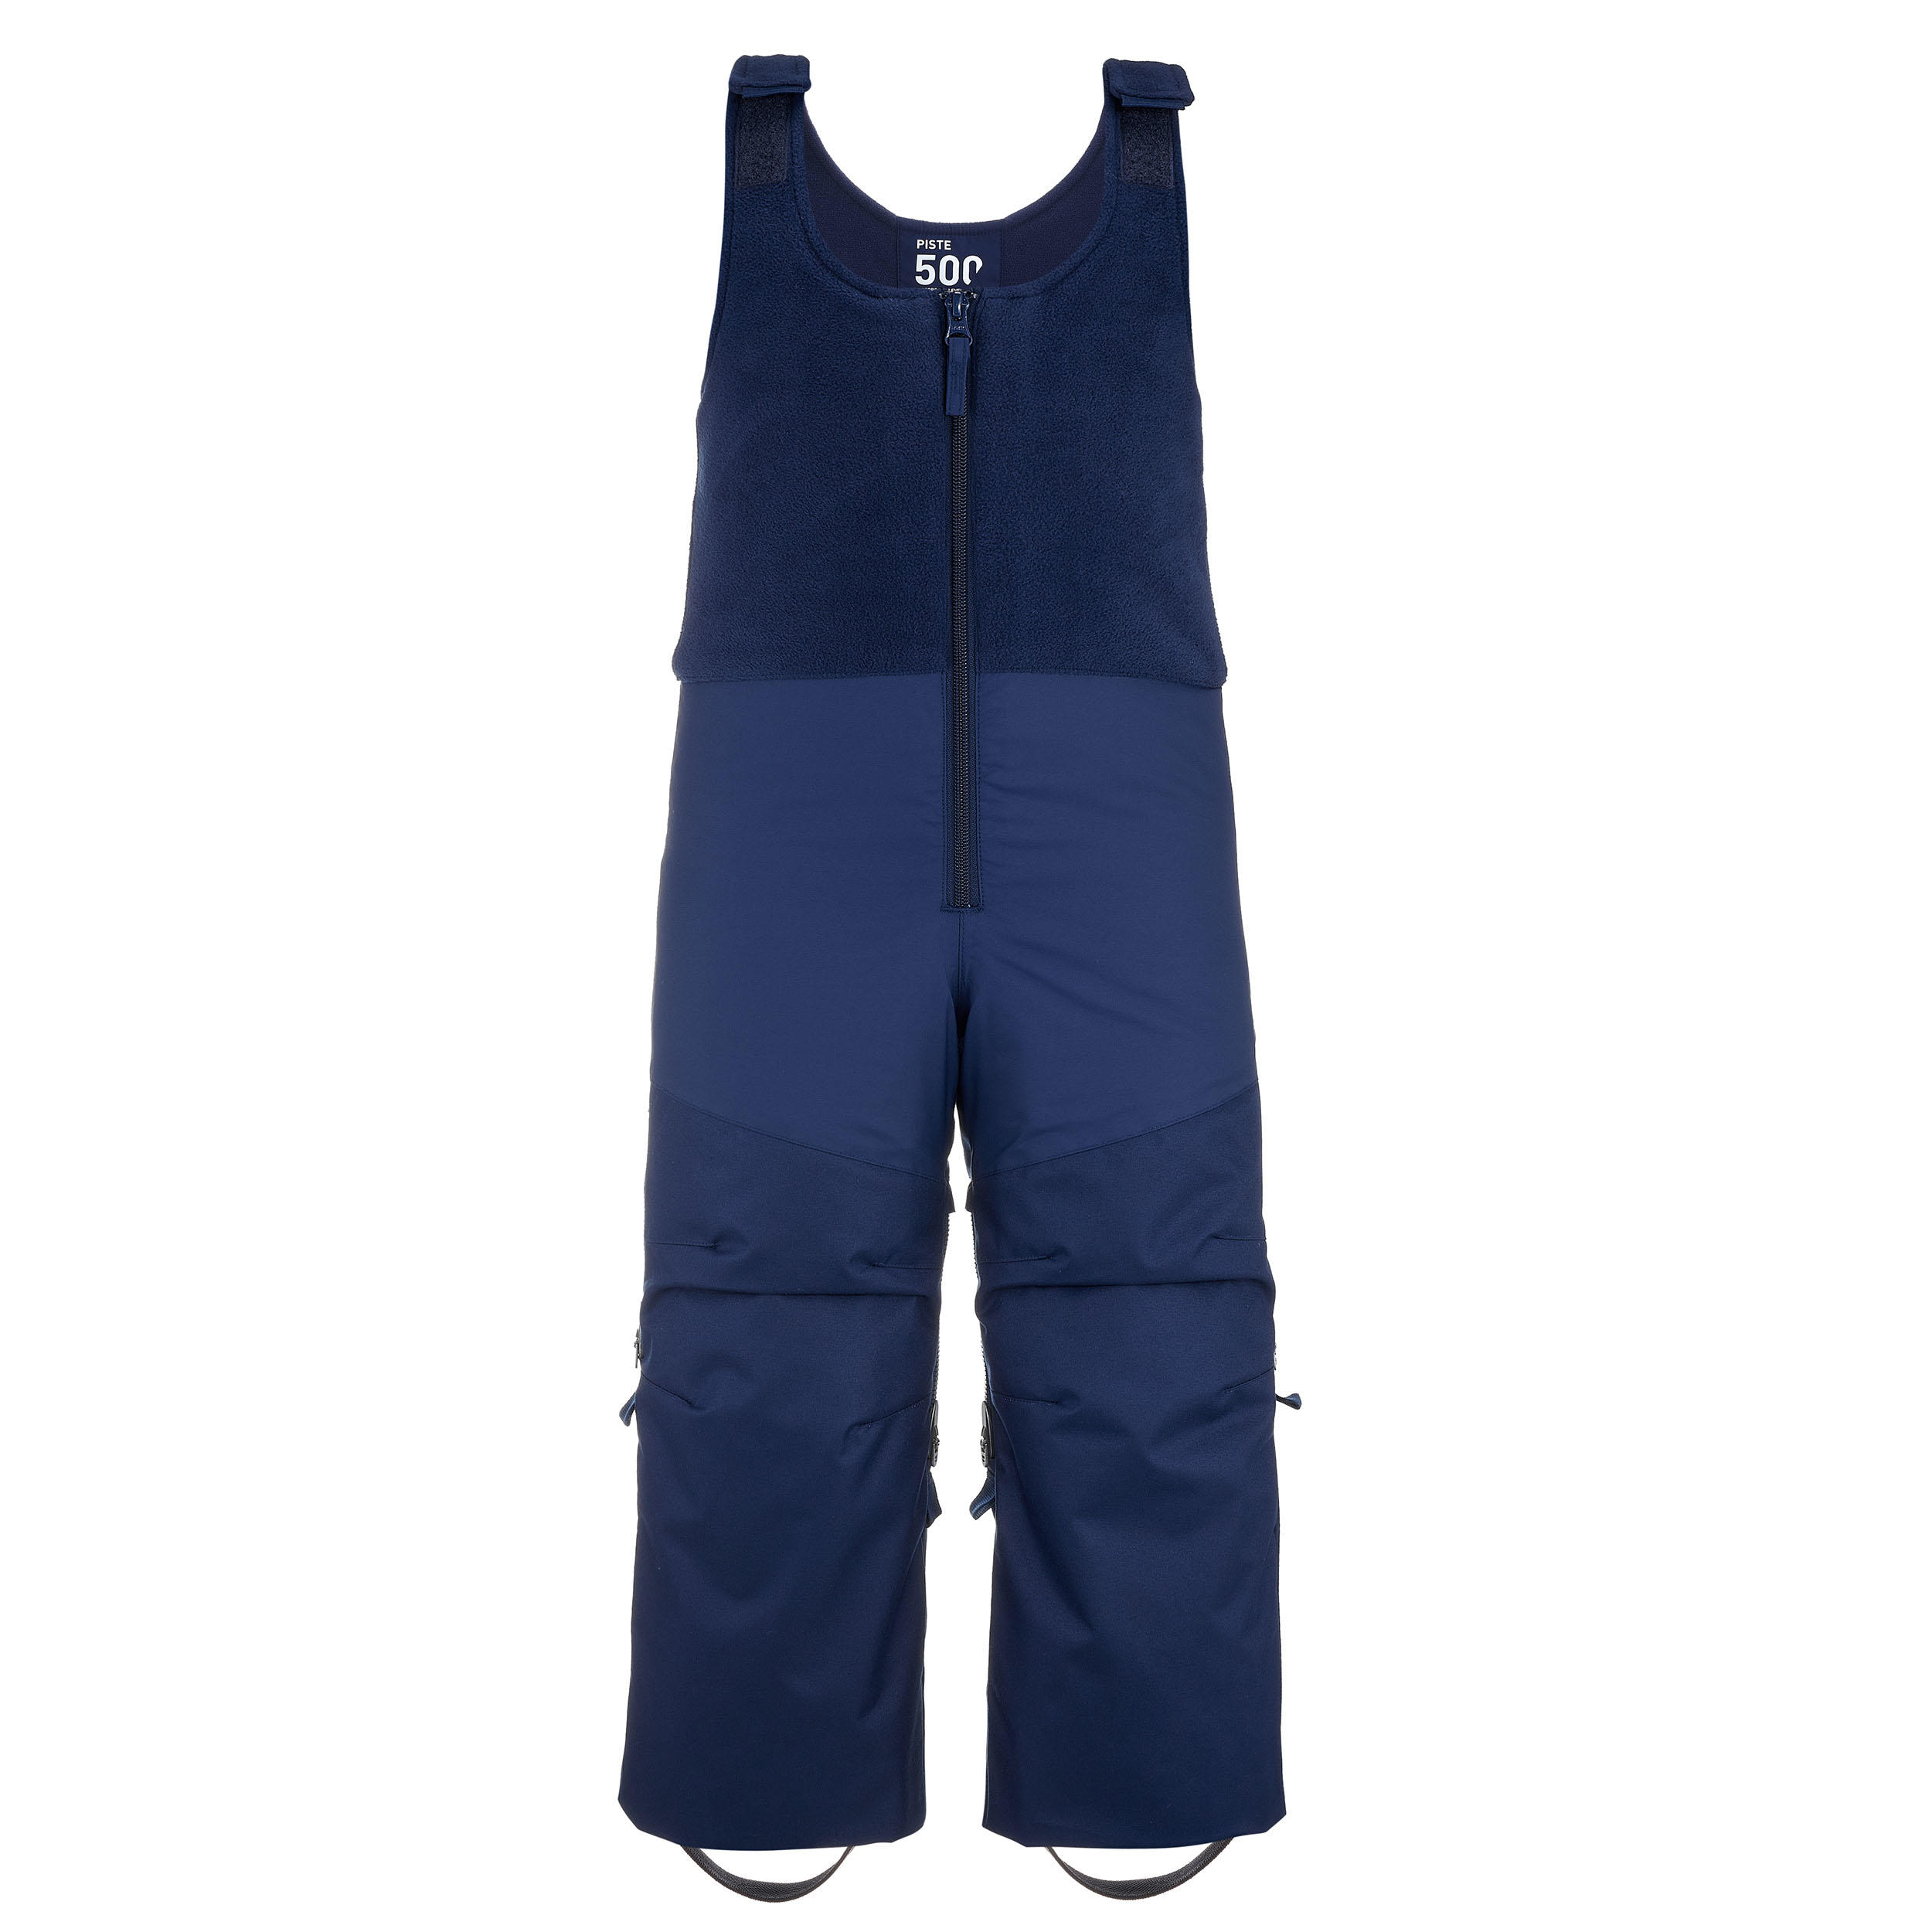 BOYS BLUE THERMAL Leggings And Top Age 6-8 years from lidl £9.00 - PicClick  UK